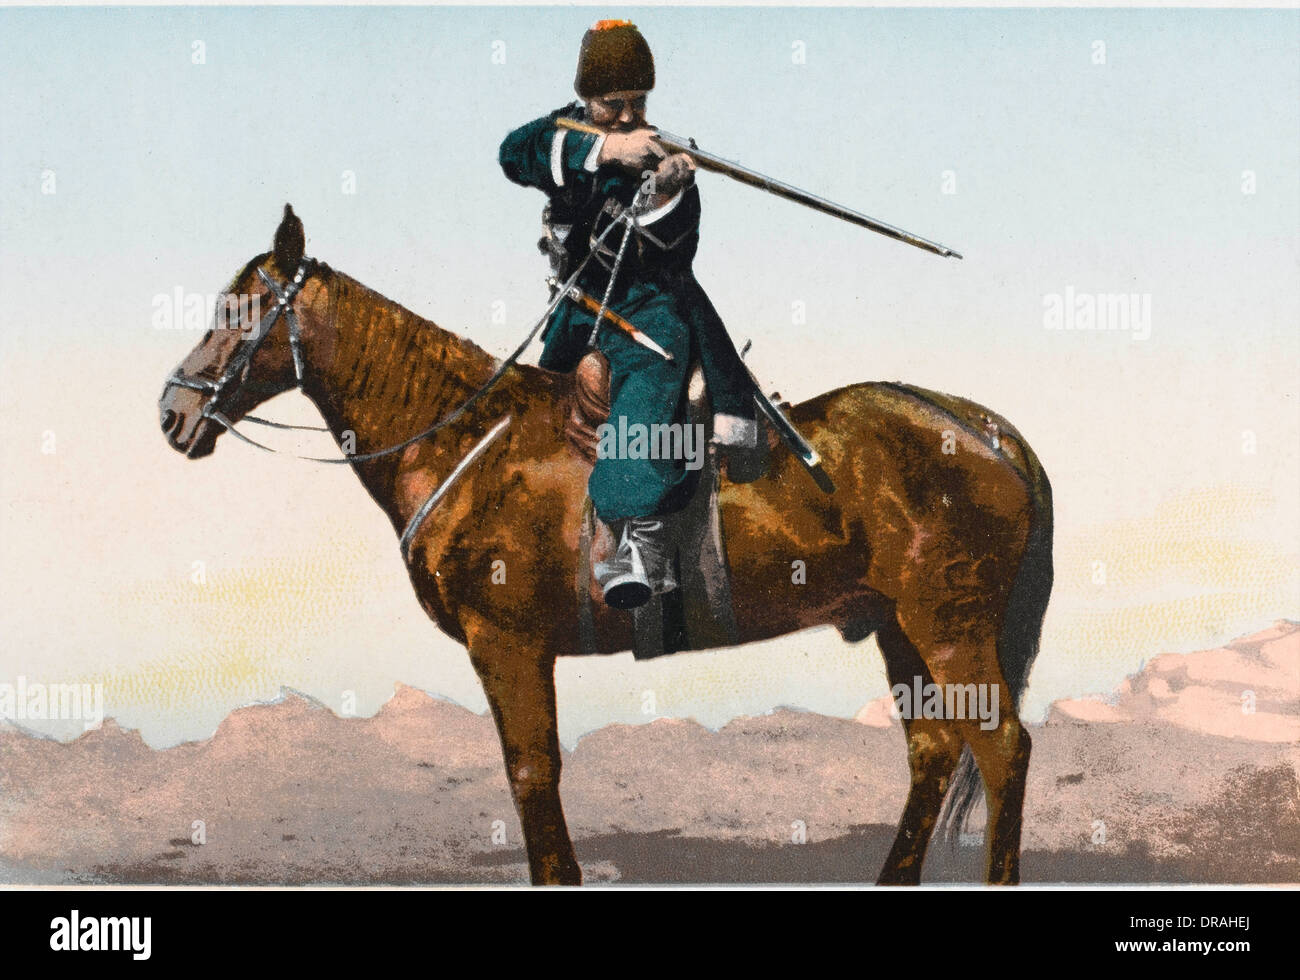 Cossack on a horse Stock Photo